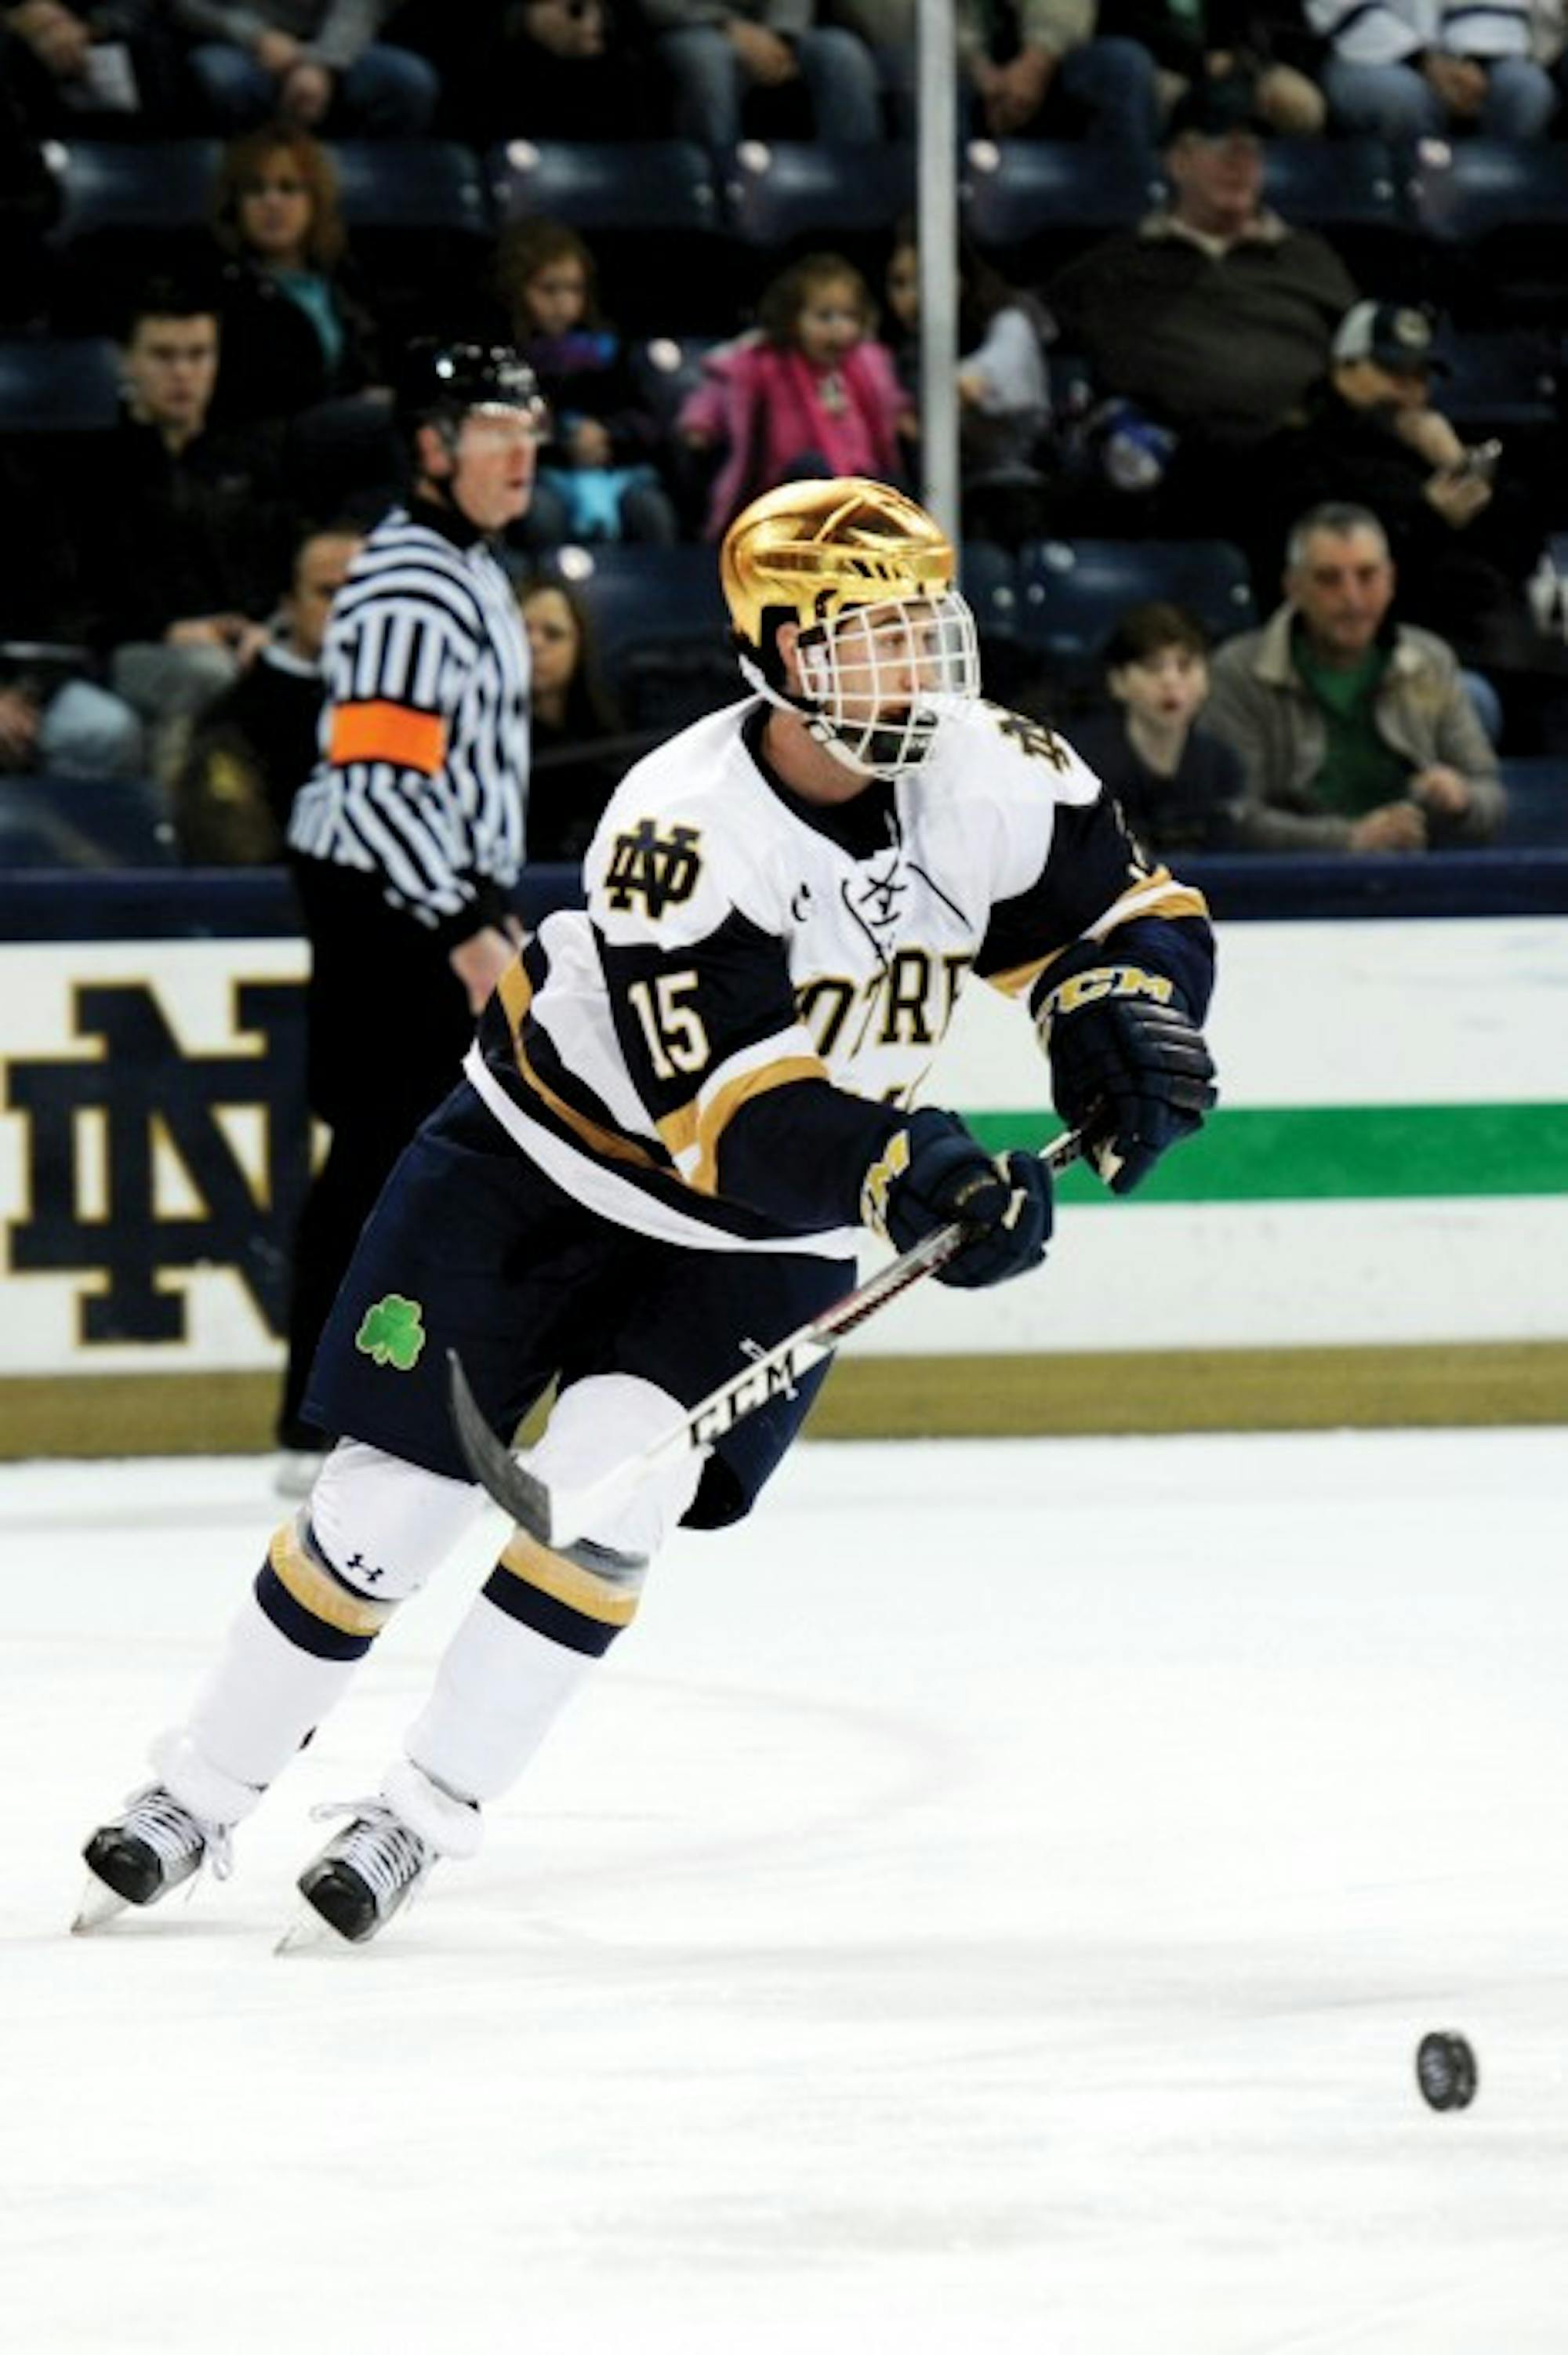 Irish sophomore Andrew Oglevie forward takes control of the puck during Notre Dame’s 3-3 tie with New Hampshire on Jan. 20.